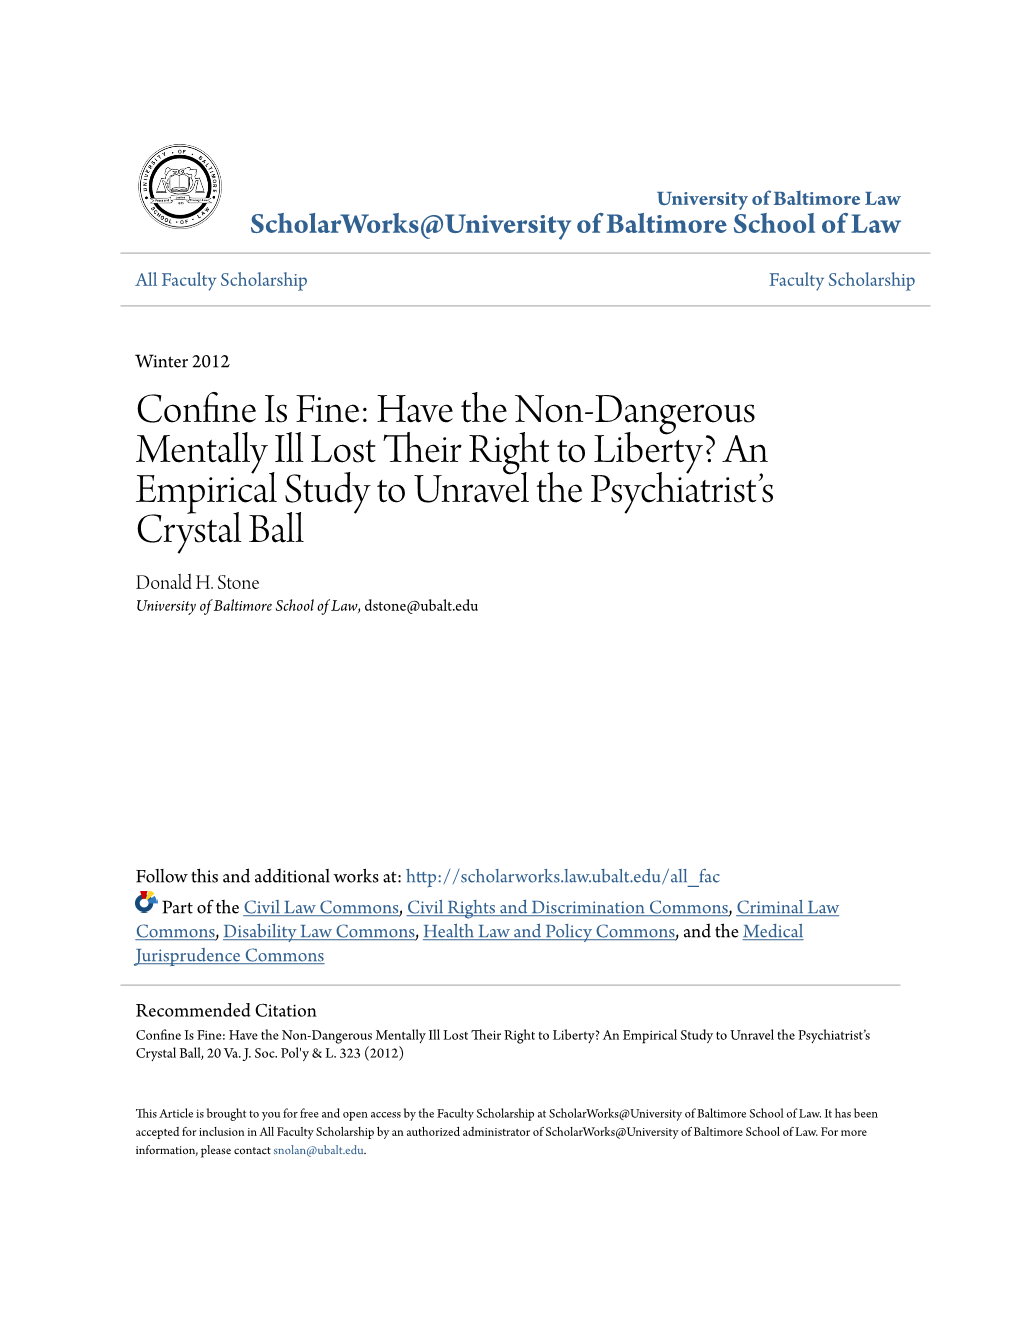 Confine Is Fine: Have the Non-Dangerous Mentally Ill Lost Their Right to Liberty? an Empirical Study to Unravel the Psychiatrist's Crystal Ball